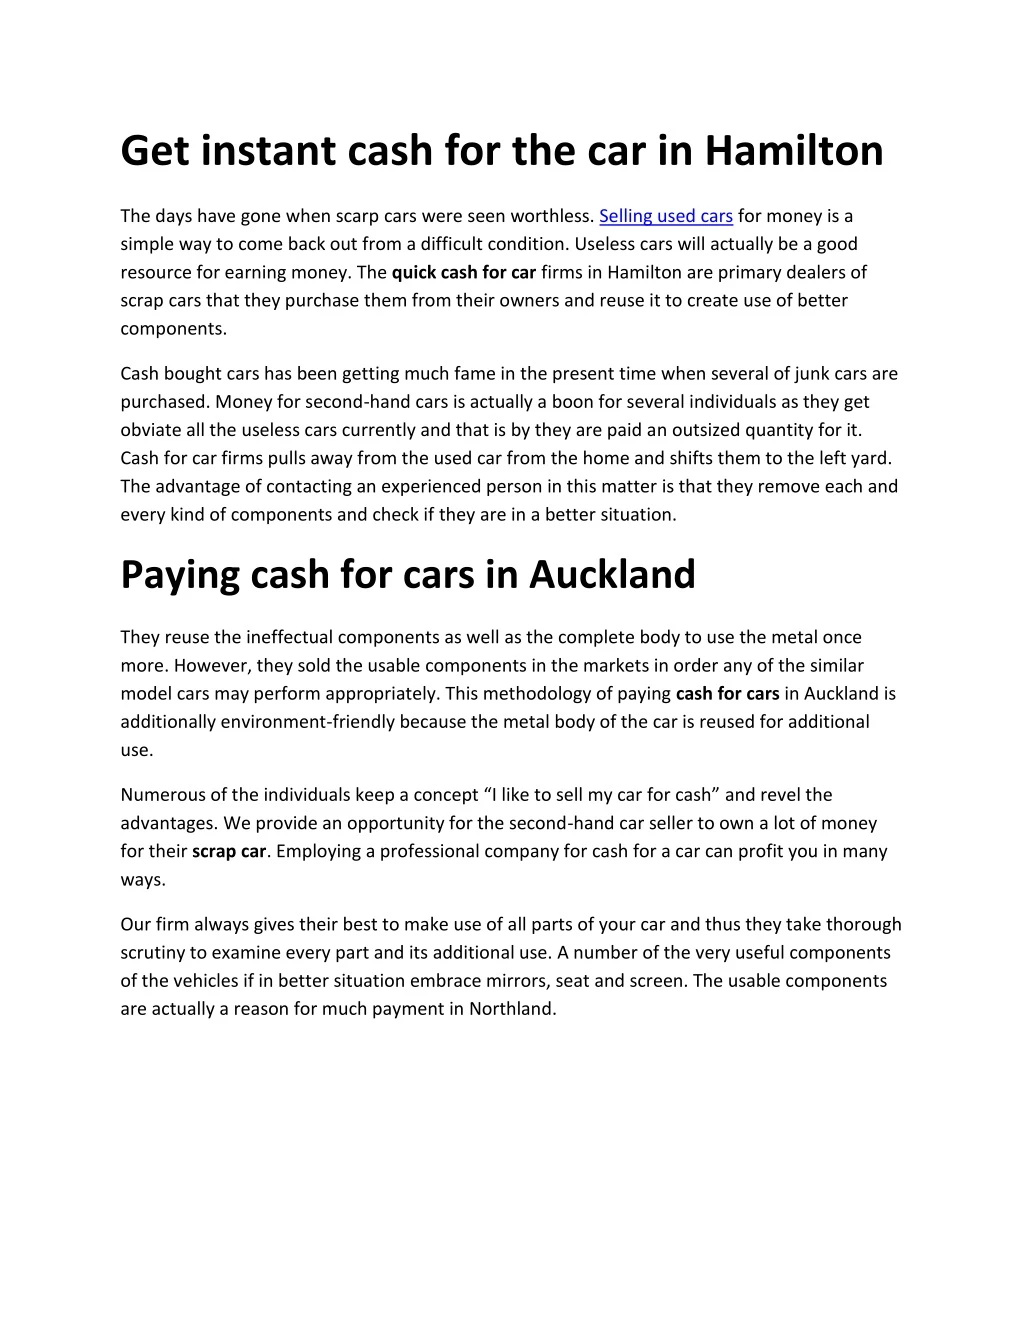 get instant cash for the car in hamilton